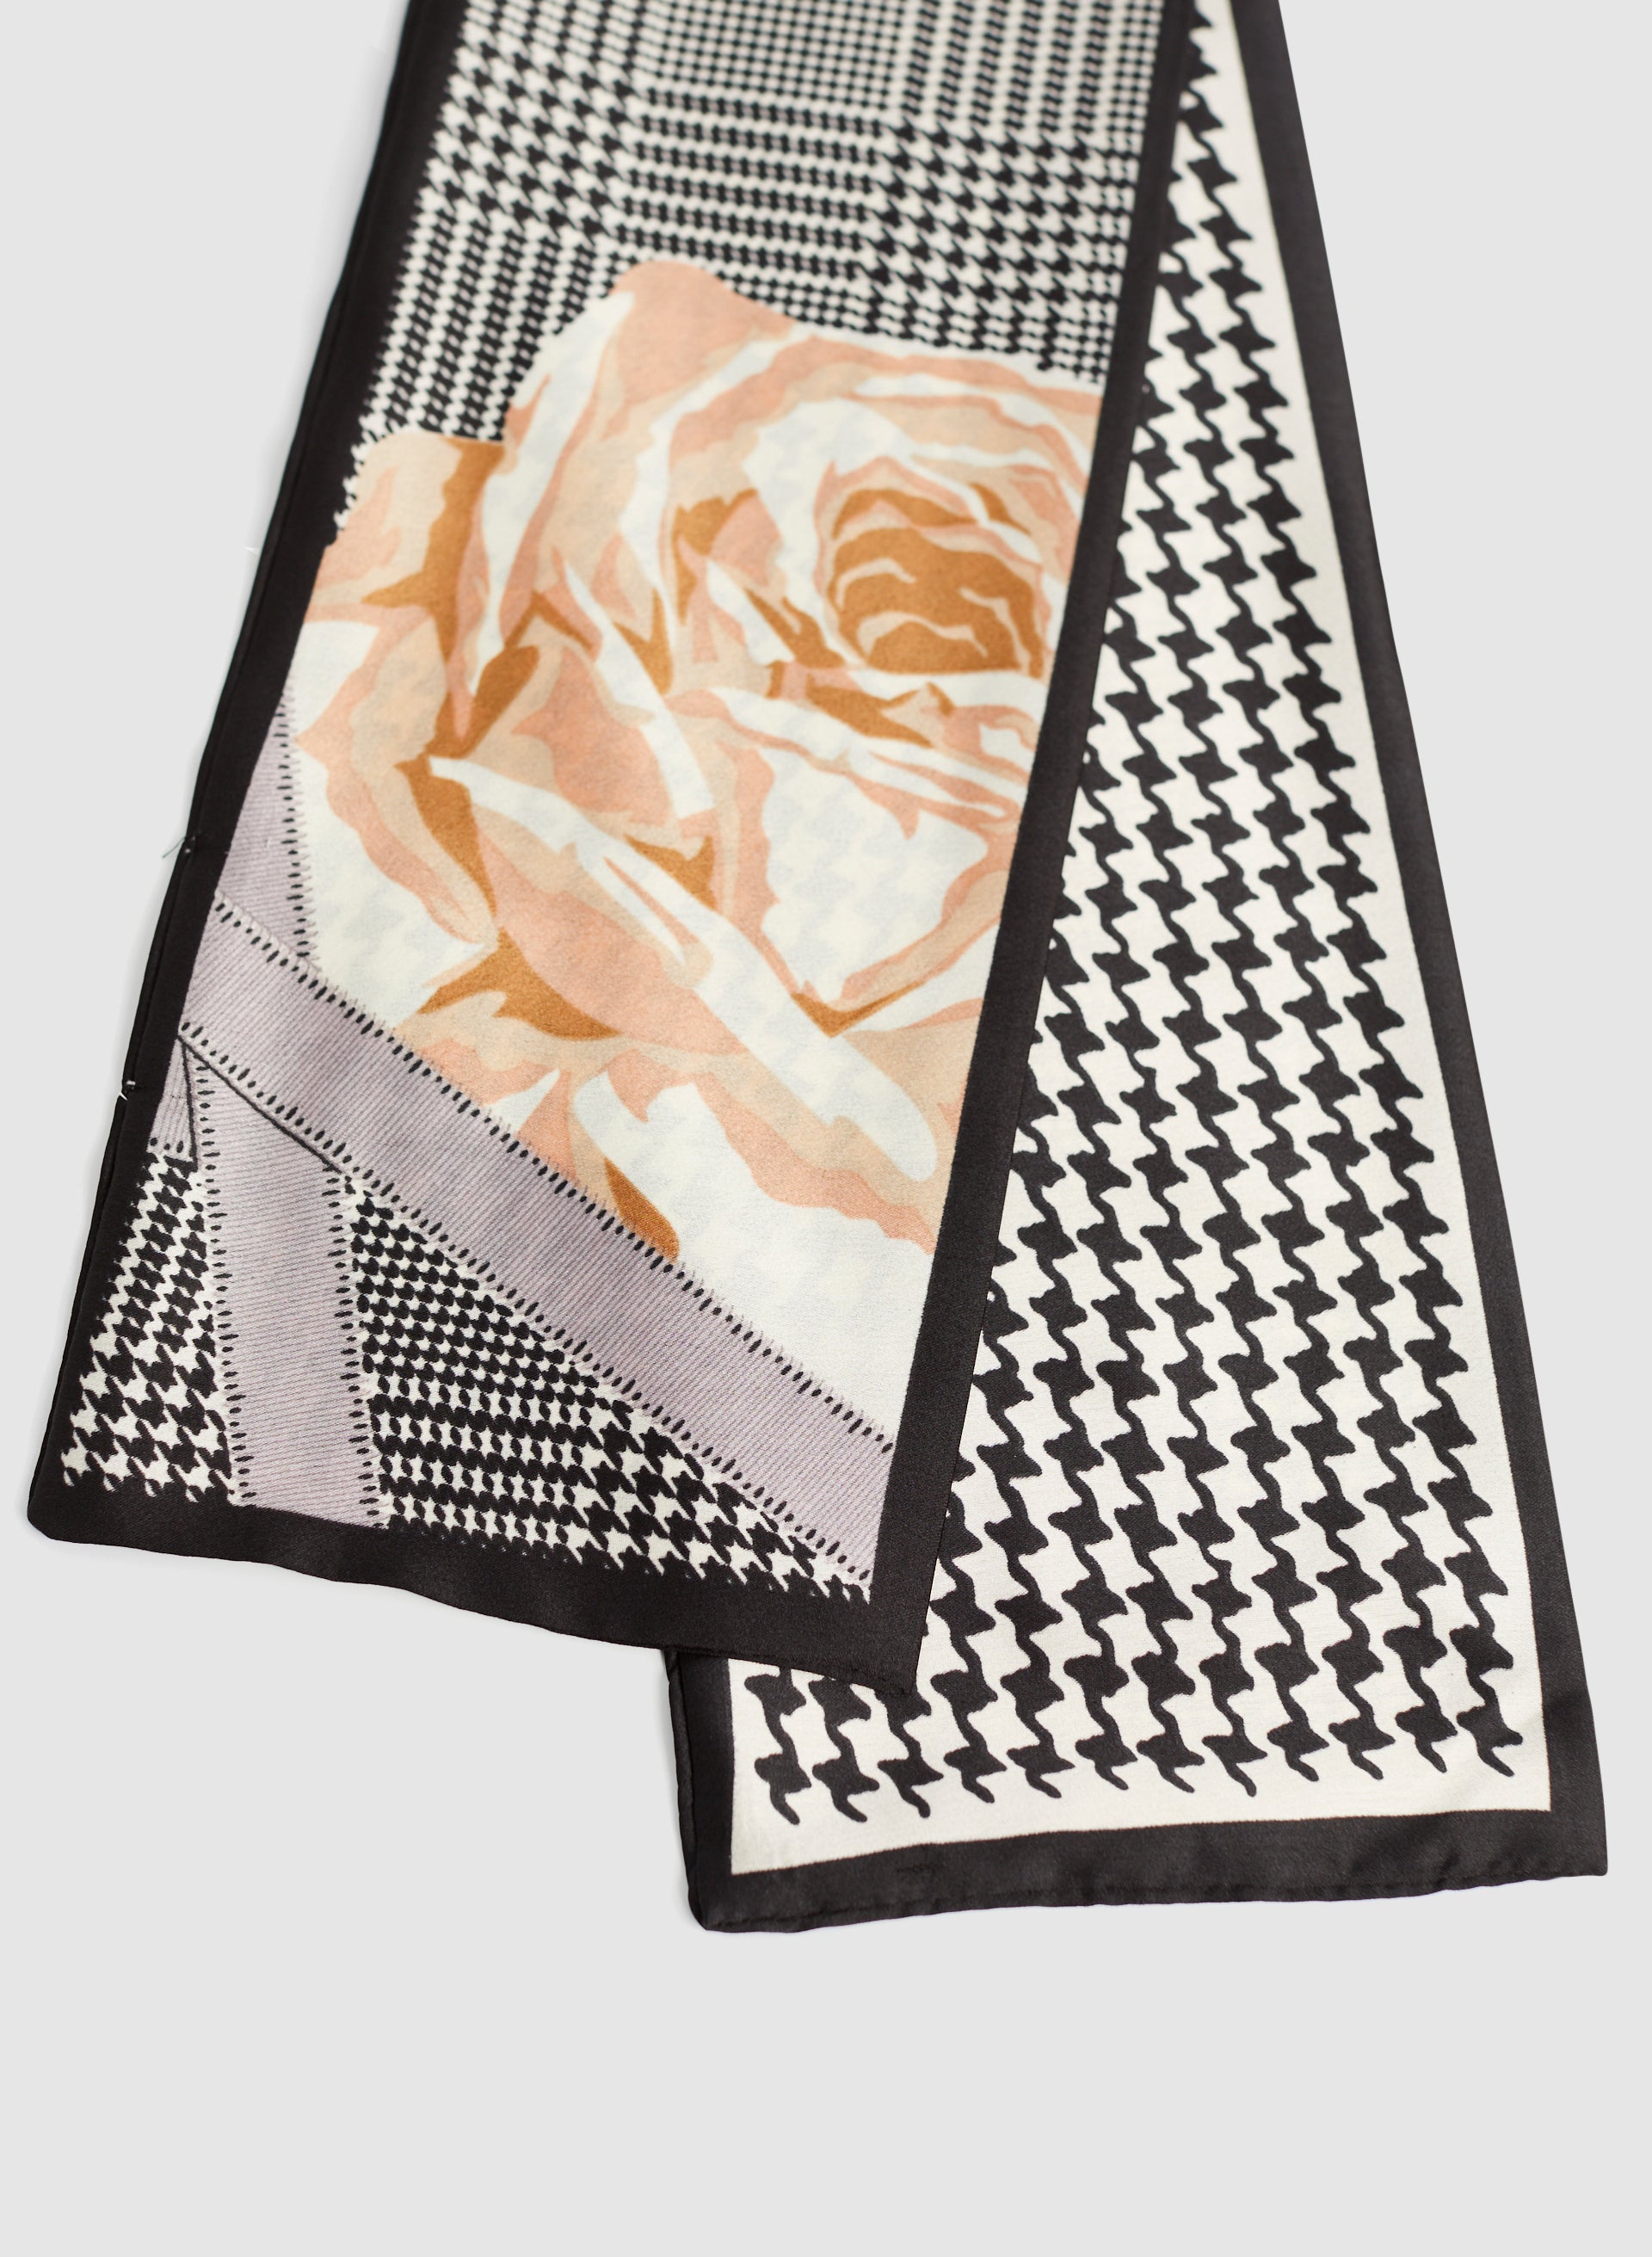 Houndstooth & Floral Print Scarf